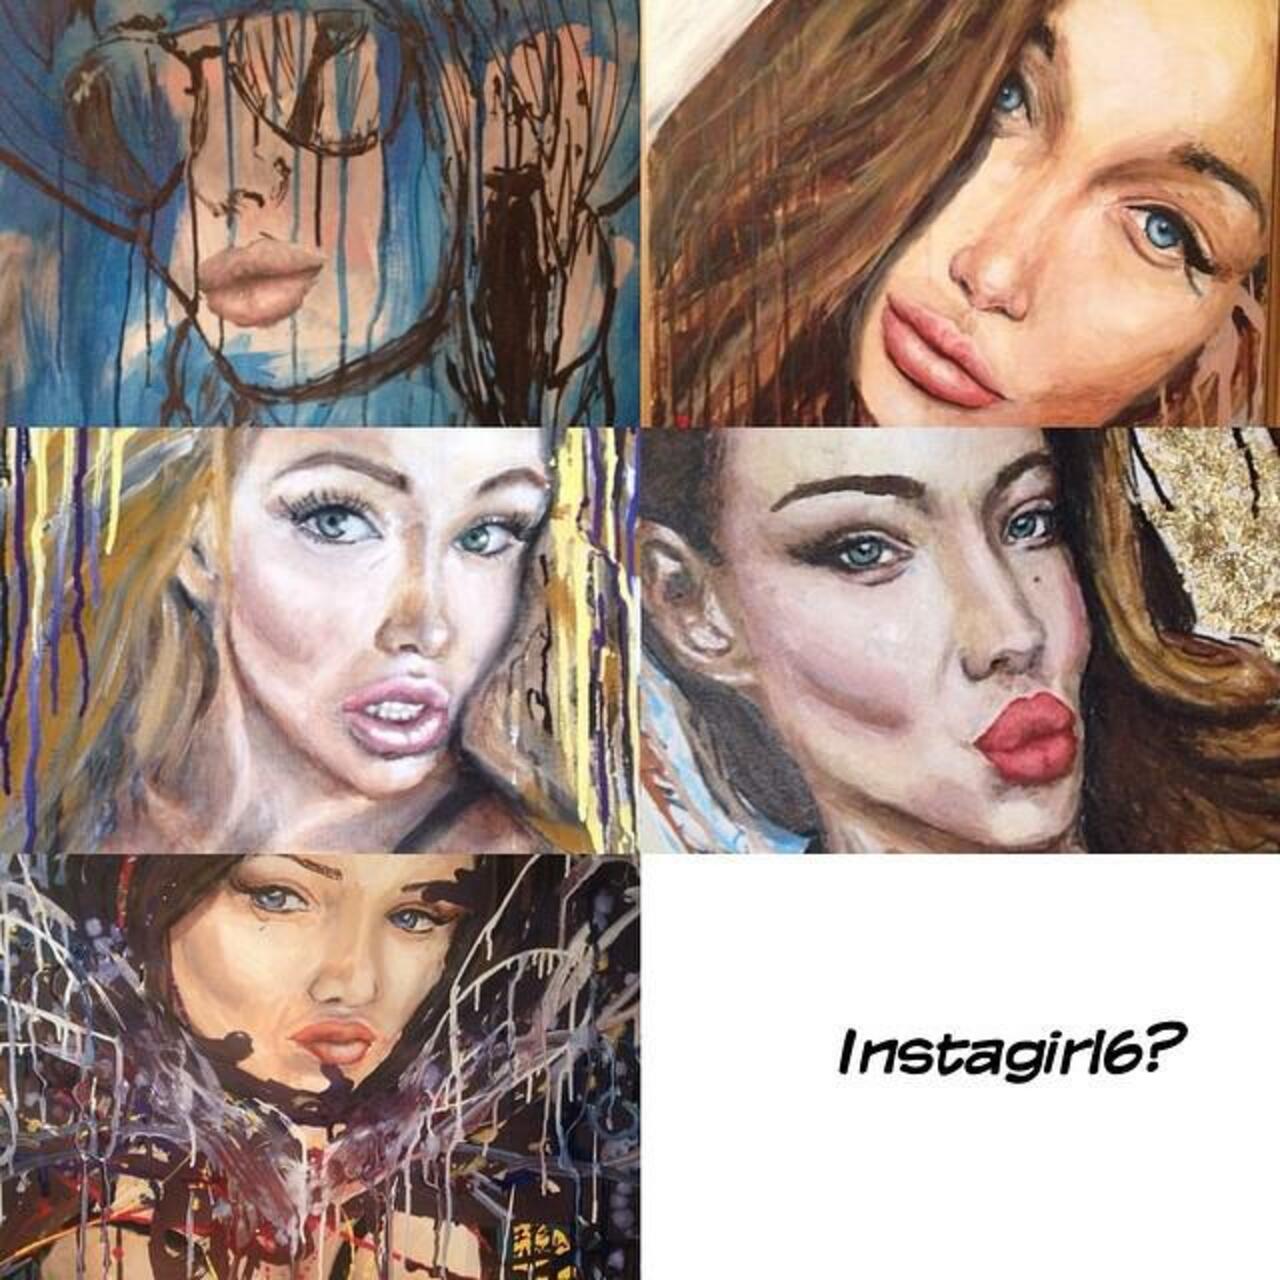 So who's the muse for my instagirl6 portrait? Hmm...
#art #portraitpainting #elle #streetart #hiphop #graffiti #gra… http://t.co/2pPk1mG6cG